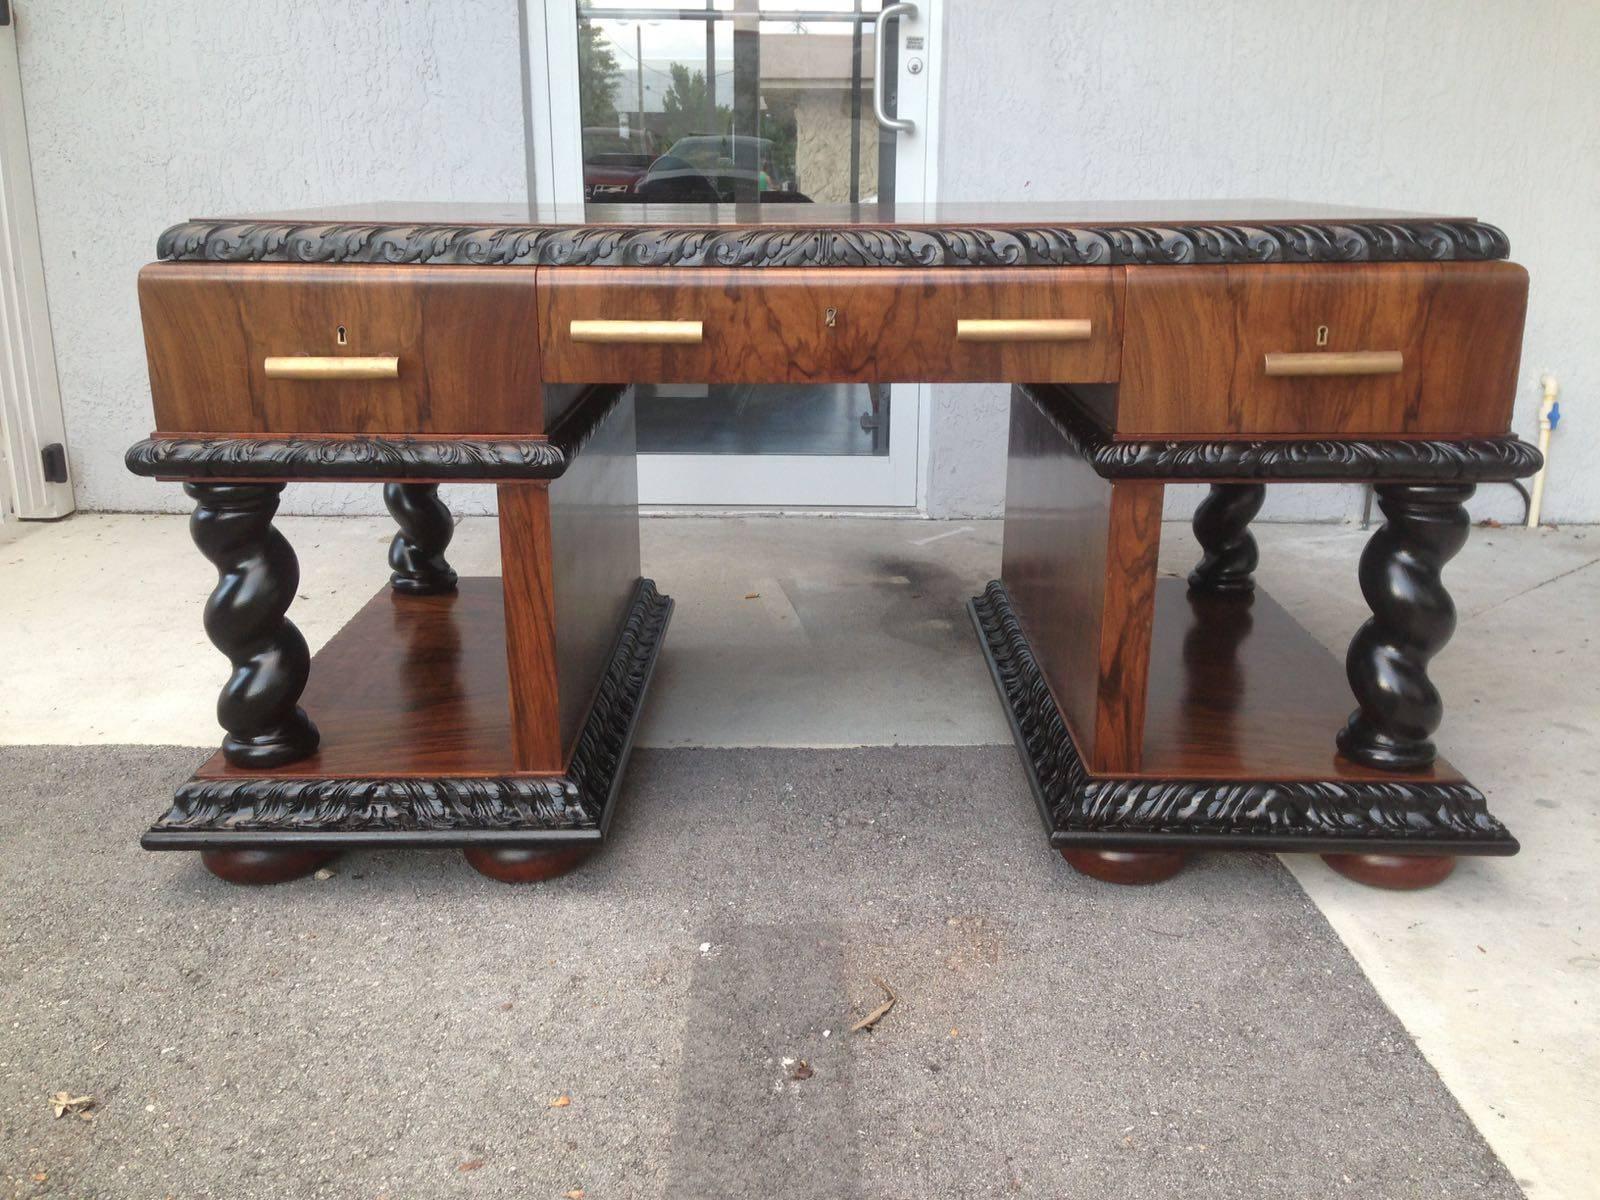 Rare and important beautiful natched Art Decó desk.
It's made in walnut root and mahogany inside lemon glass.
Restored.